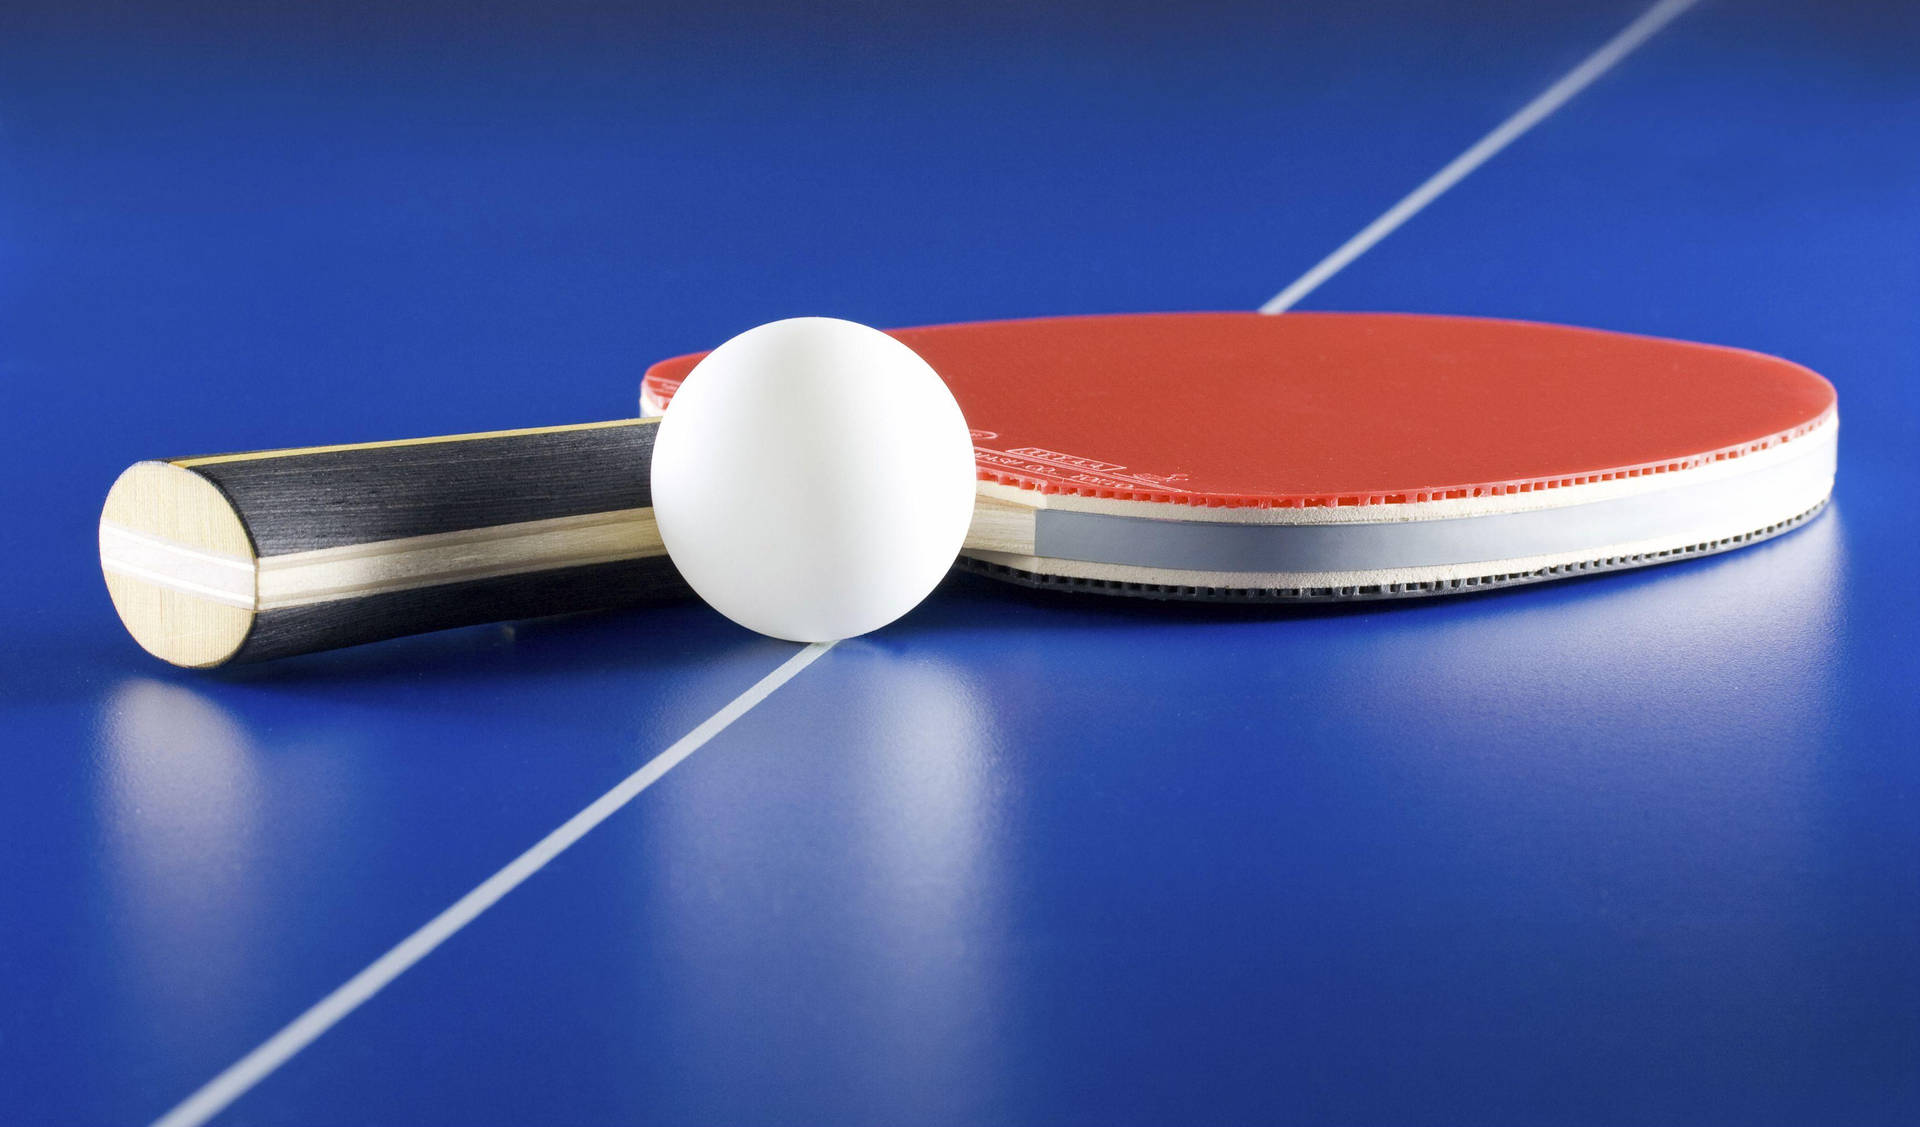 Table Tennis Paddle Set Background